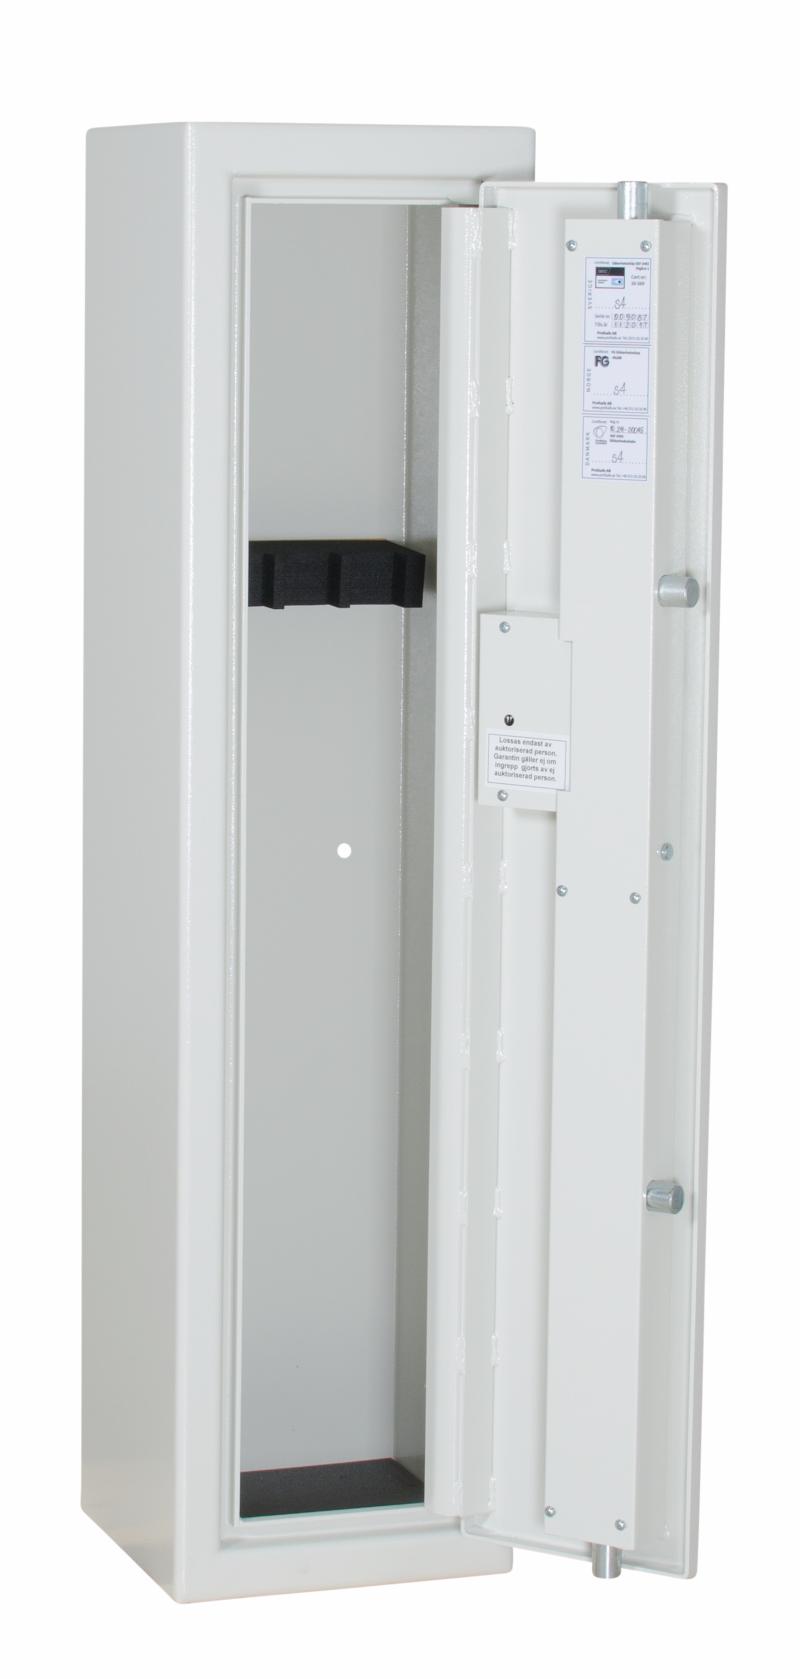 Profsafe gun safe S4 with electric code lock 1250x310x300 mm